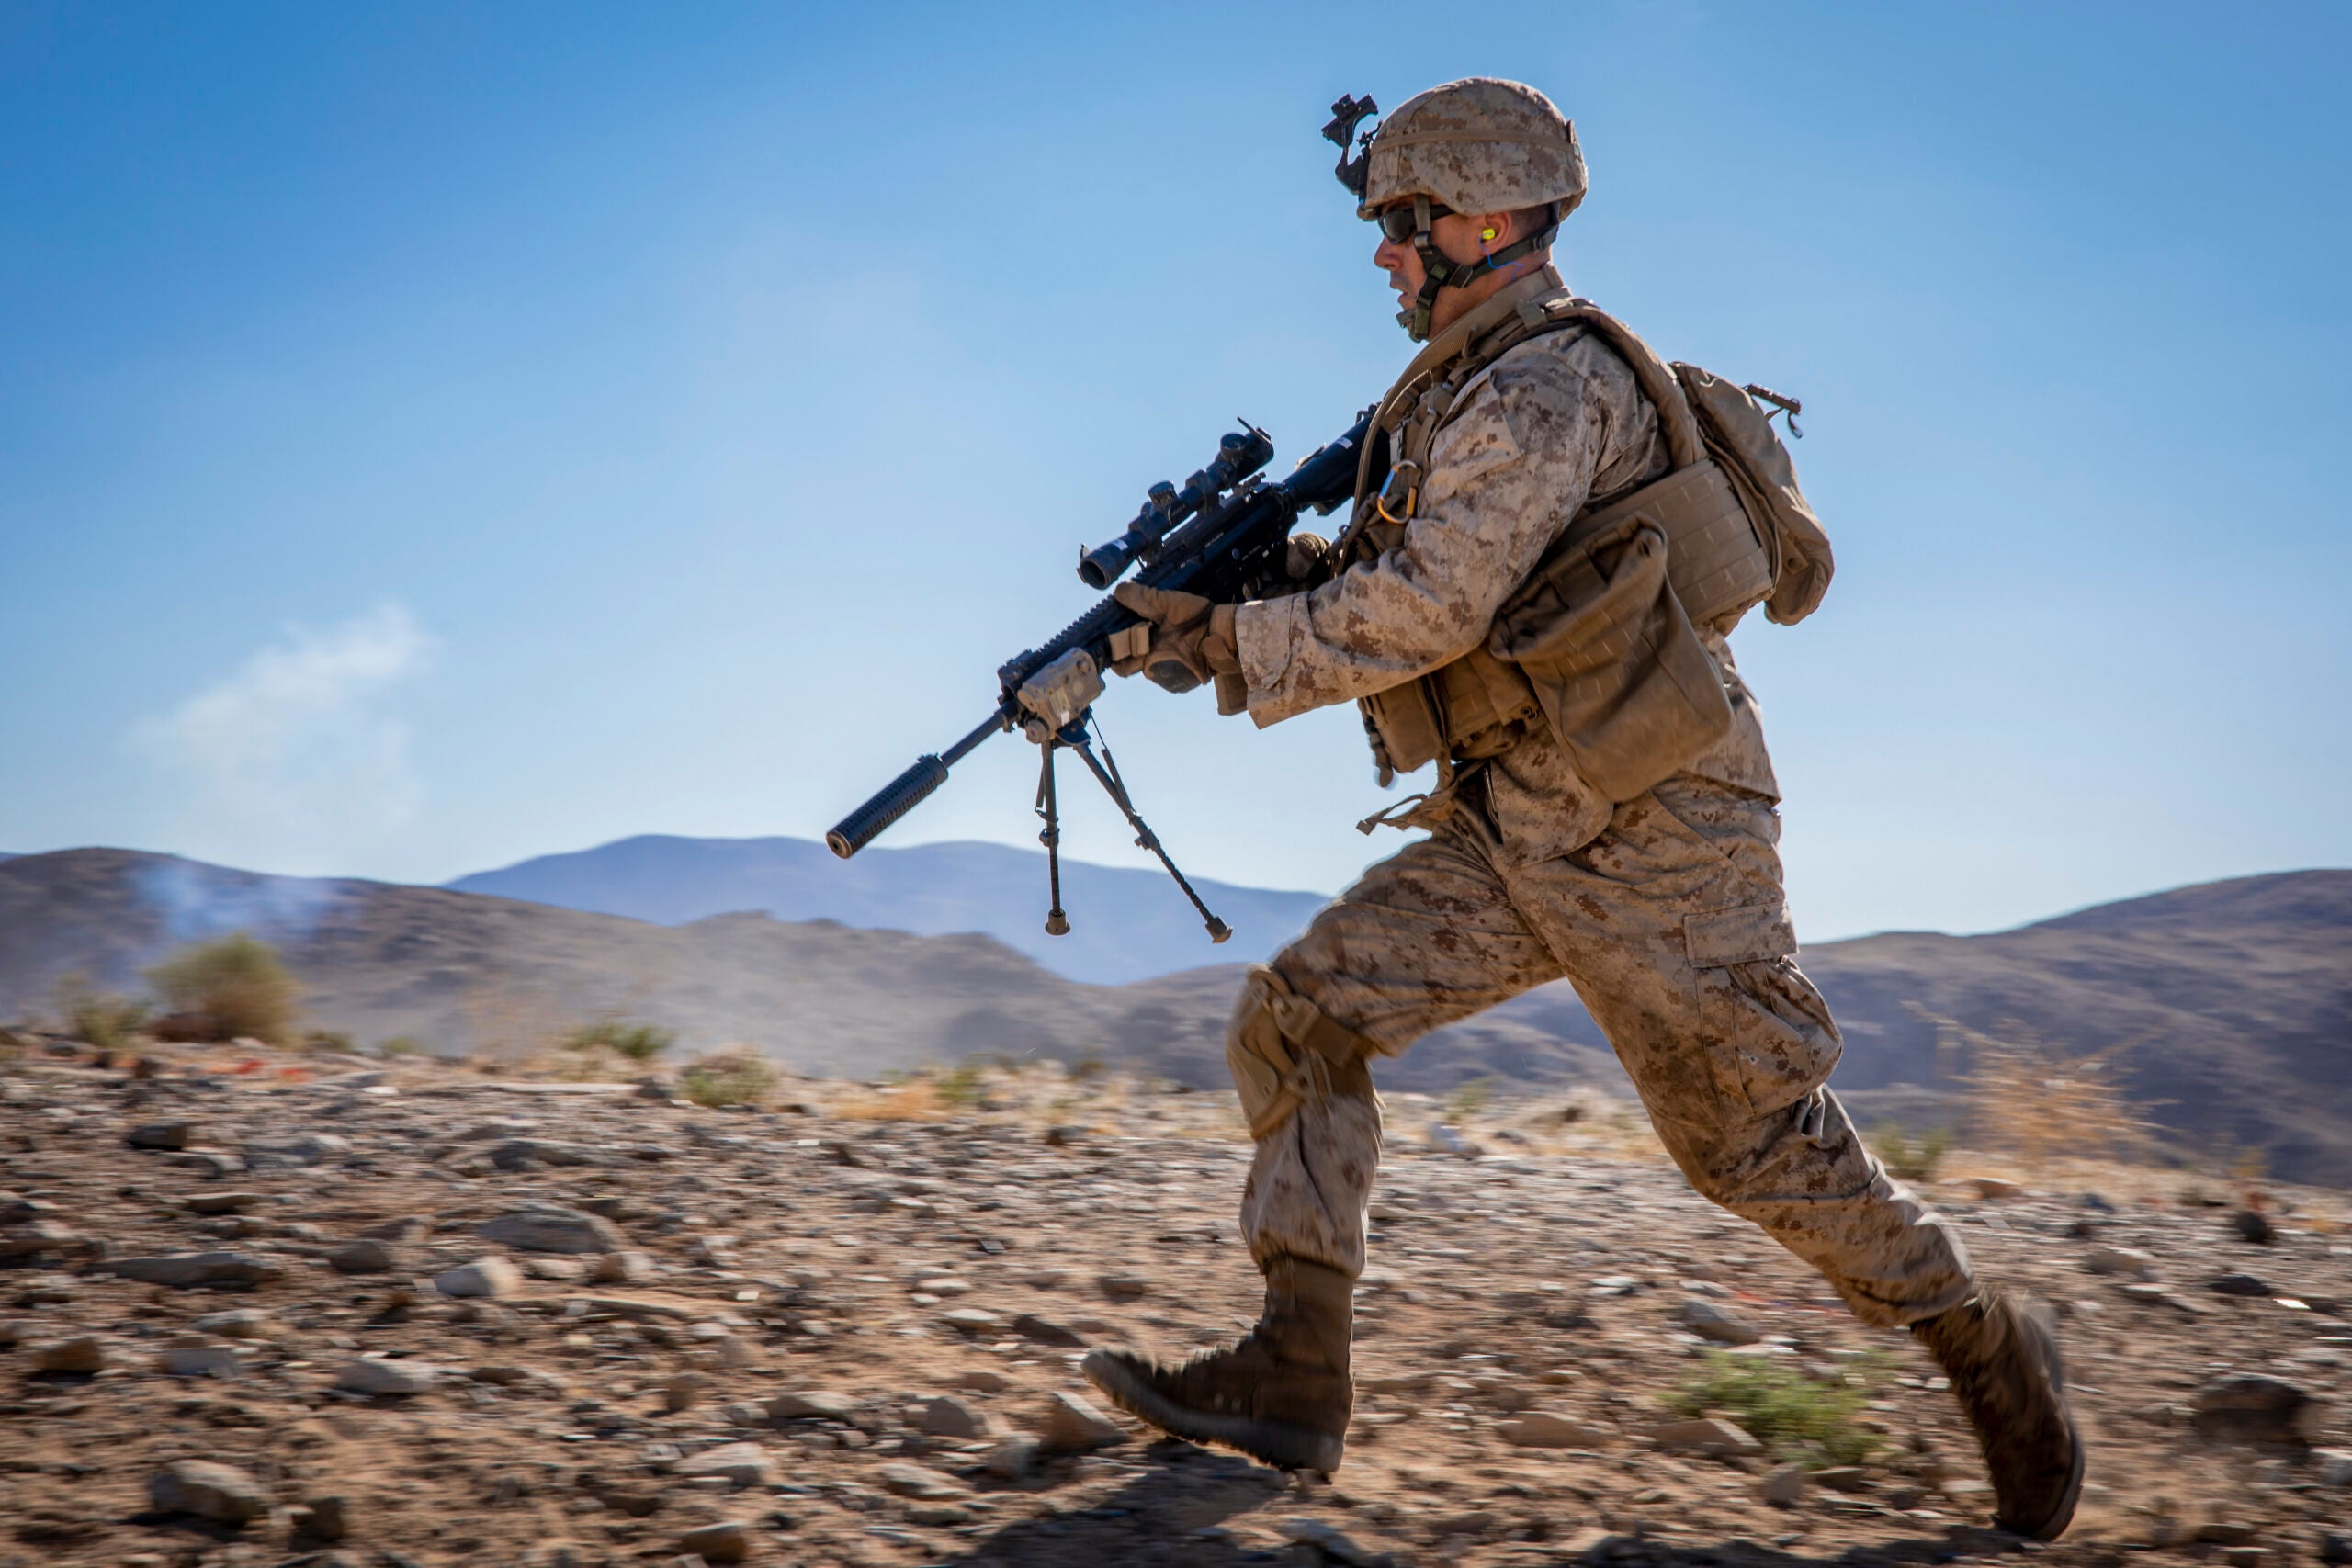 A U.S. Marine Corps infantry rifleman with 1st Battalion, 25th Marine Regiment, 4th Marine Division, moves towards a simulated target during Integrated Training Exercise 5-19 at Marine Corps Air Ground Combat Center Twentynine Palms, Calif., July 27, 2019. ITX 5-19 is a live-fire and maneuver combined arms exercise designed to train battalion and squadron-sized units in tactics, techniques, and procedures required to provide a sustainable and ready operational reserve for employment across the full spectrum of crisis and global engagement. (U.S. Marine Corps photo by Lance Cpl. Jose Gonzalez)